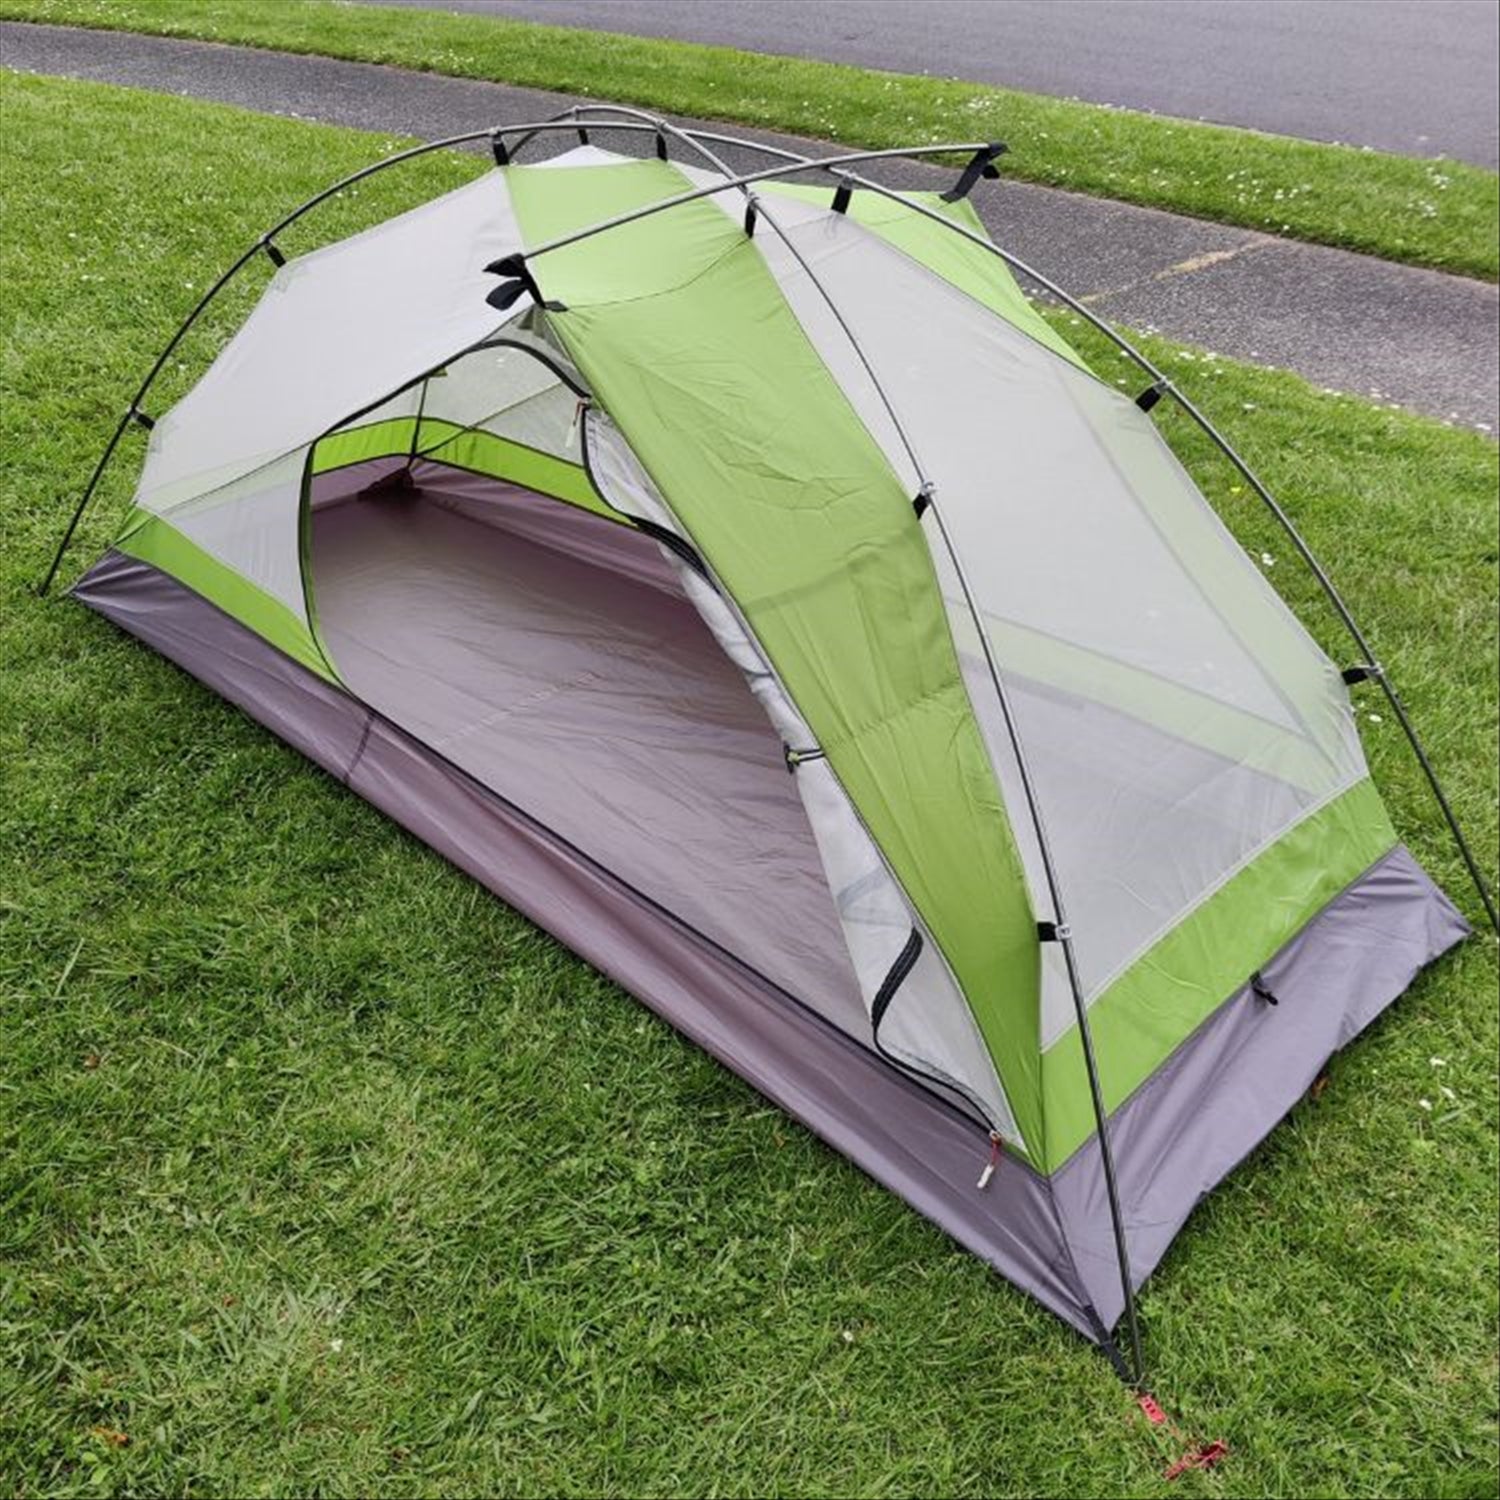 Intents Intents Outdoors MCX 1 - Lightweight 1 Person Tent, 1.95kg